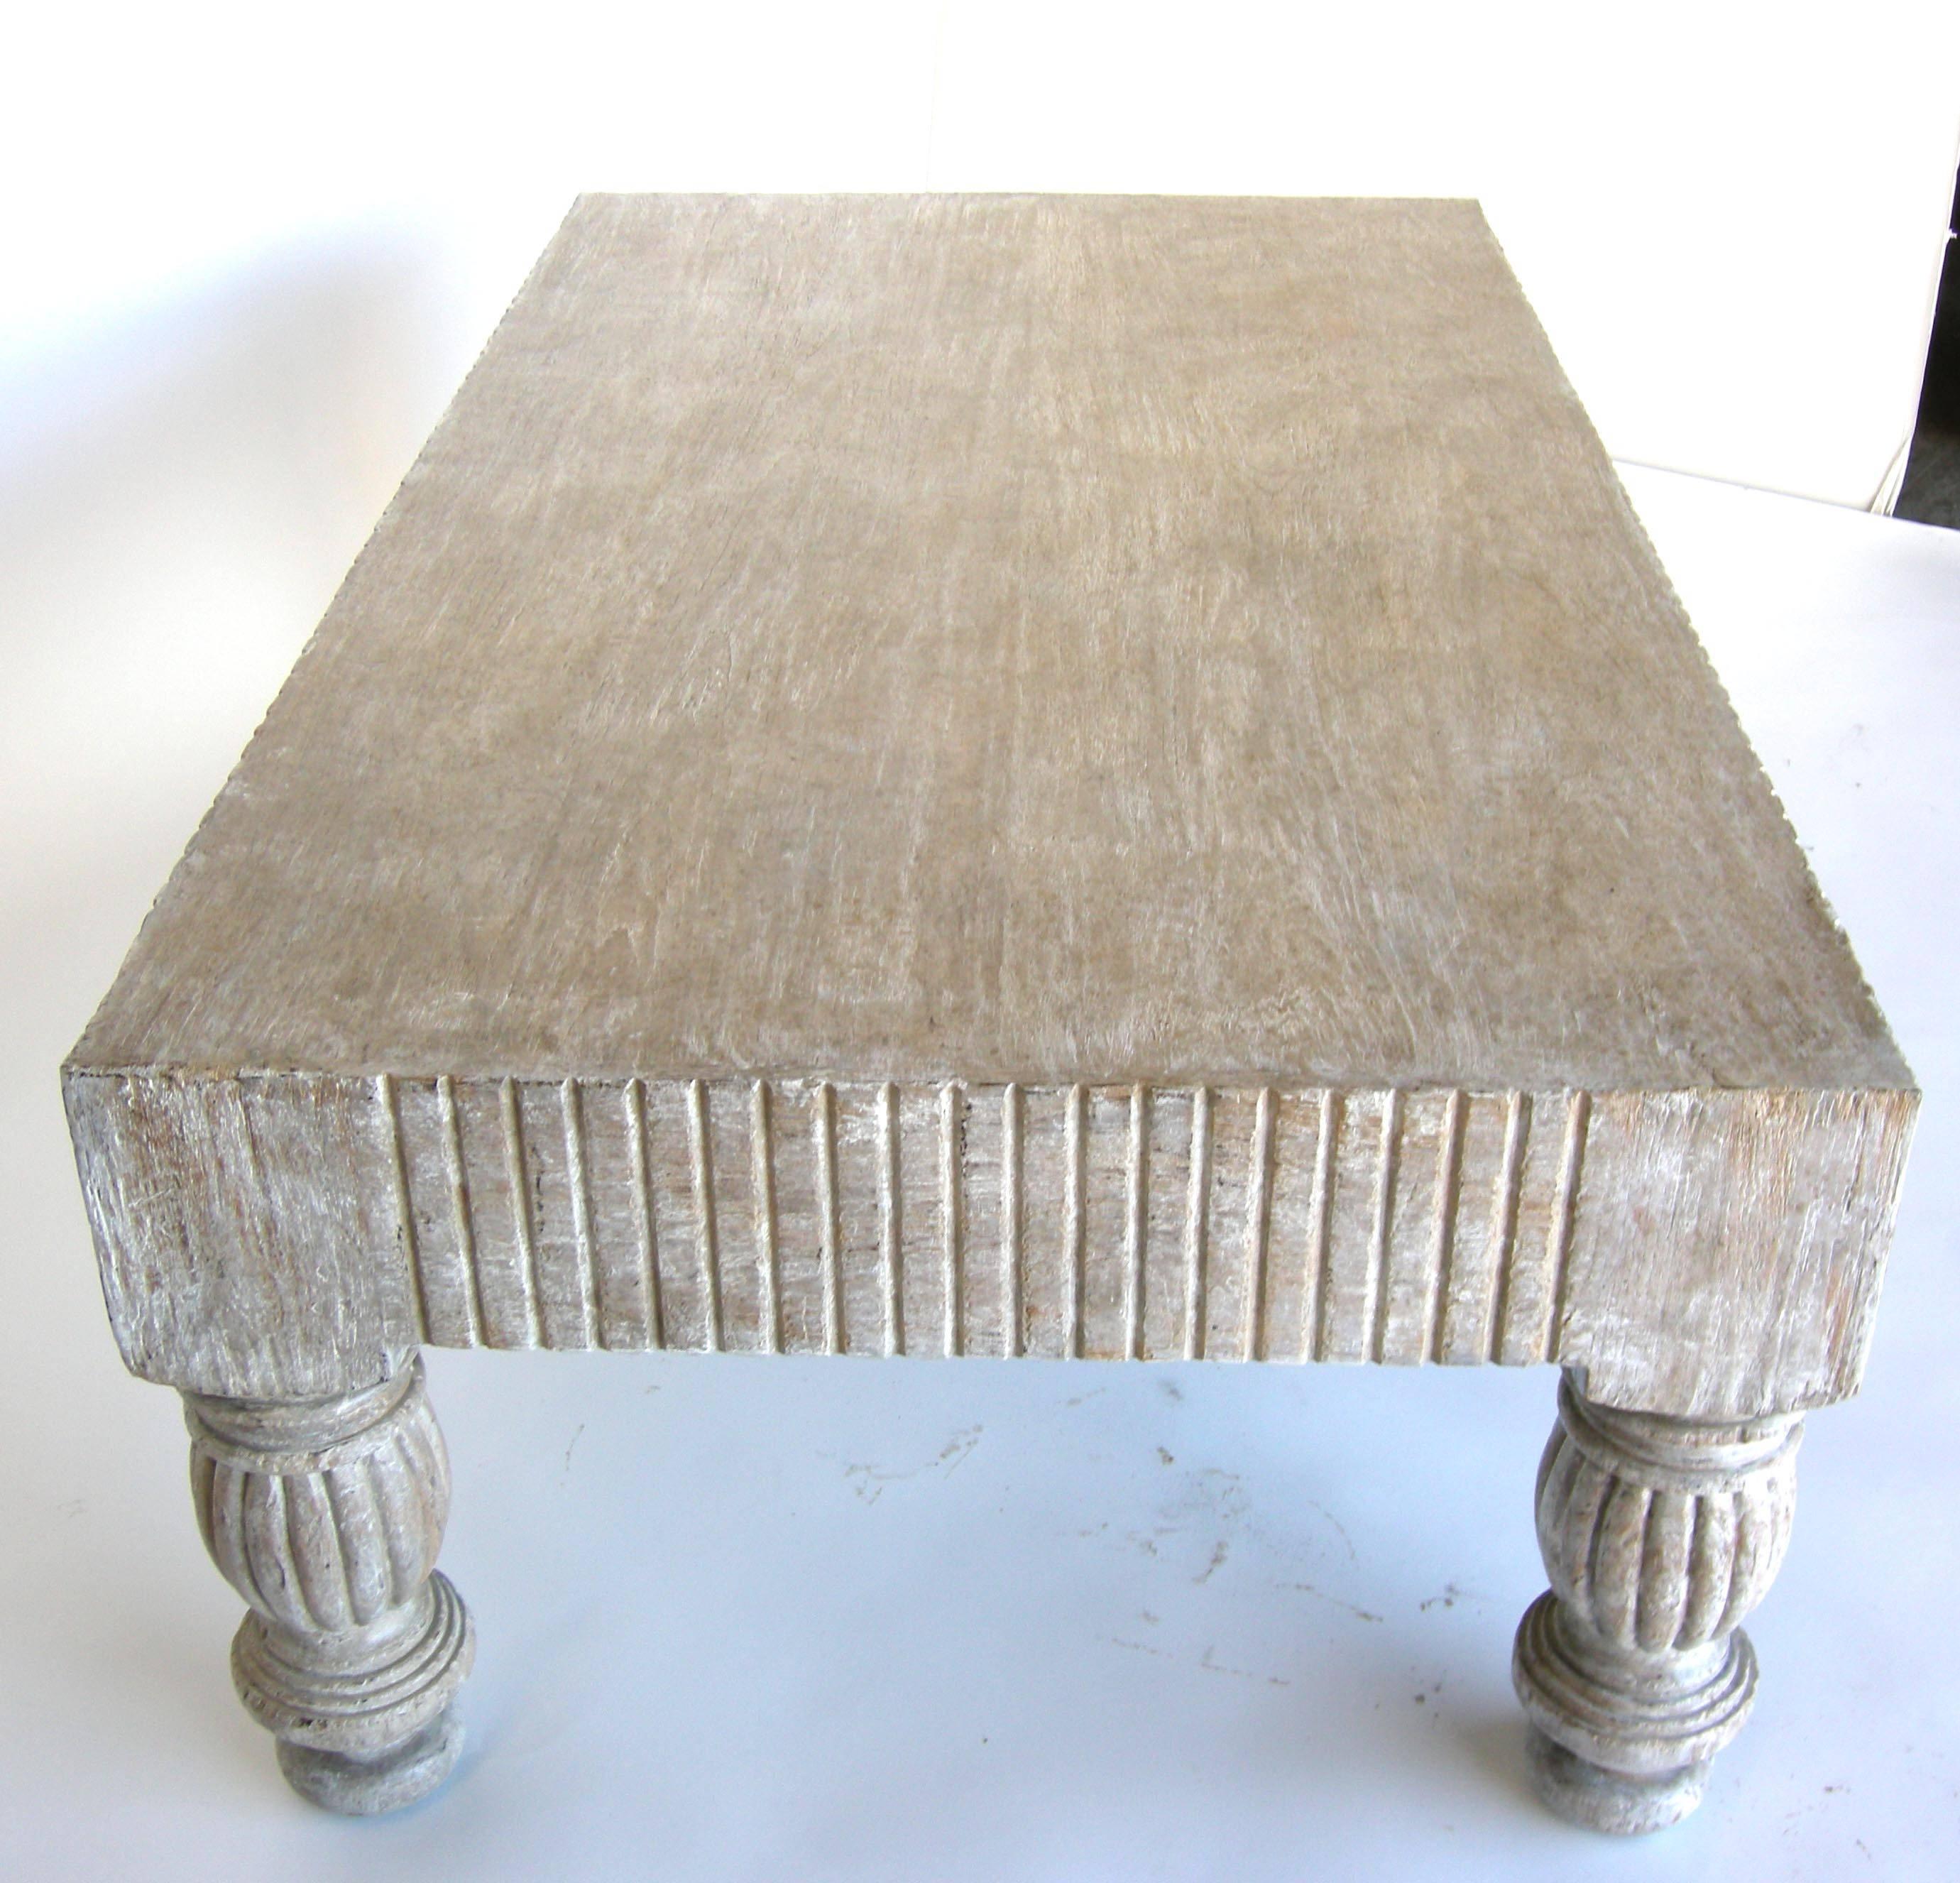 Gustavian Dos Gallos Custom Coffee Table in Driftwood Finish For Sale